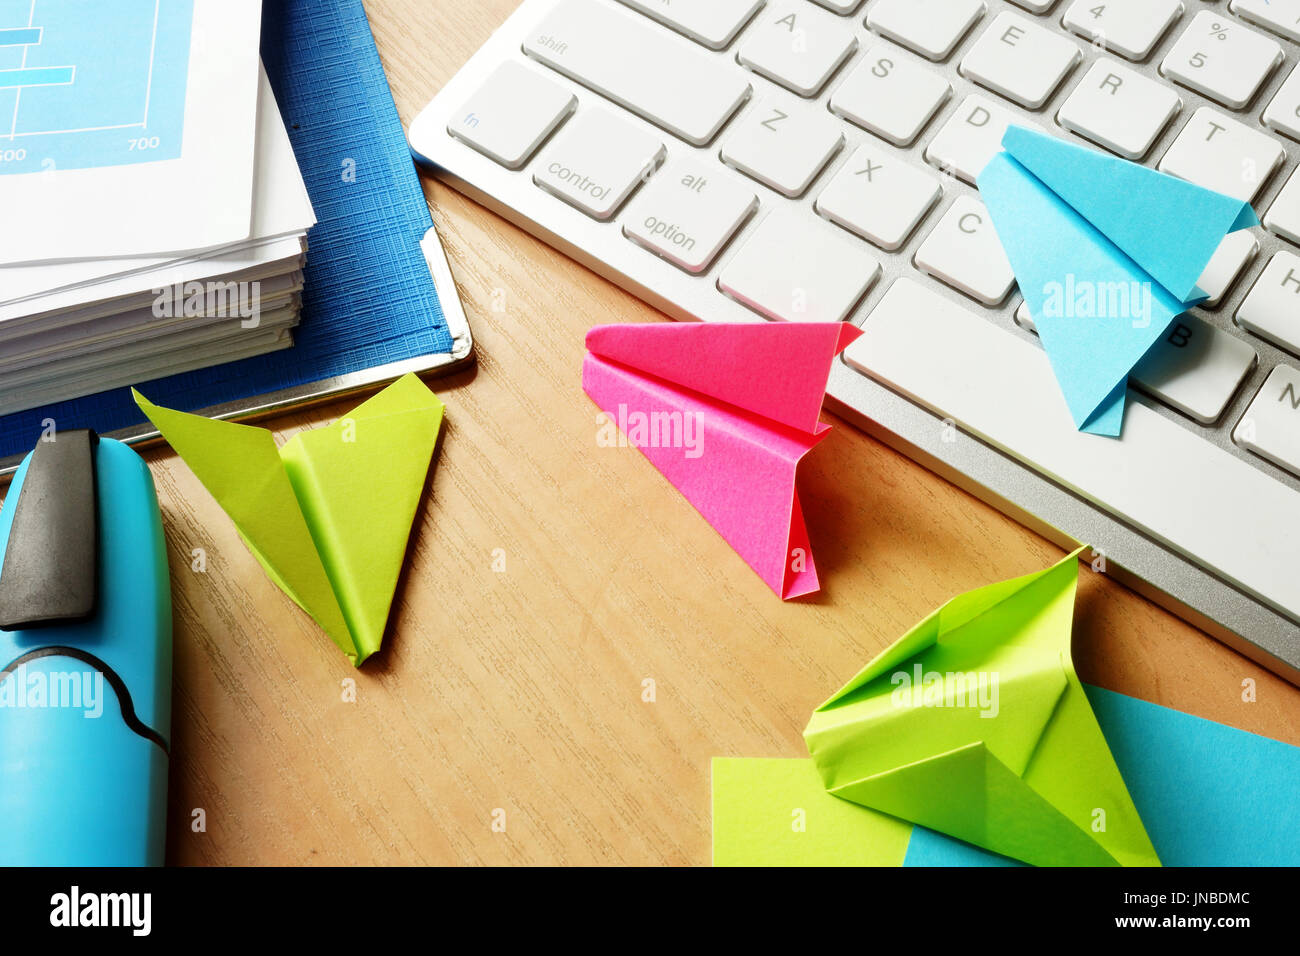 Procrastination concept. Colorful paper planes on an office table. Stock Photo